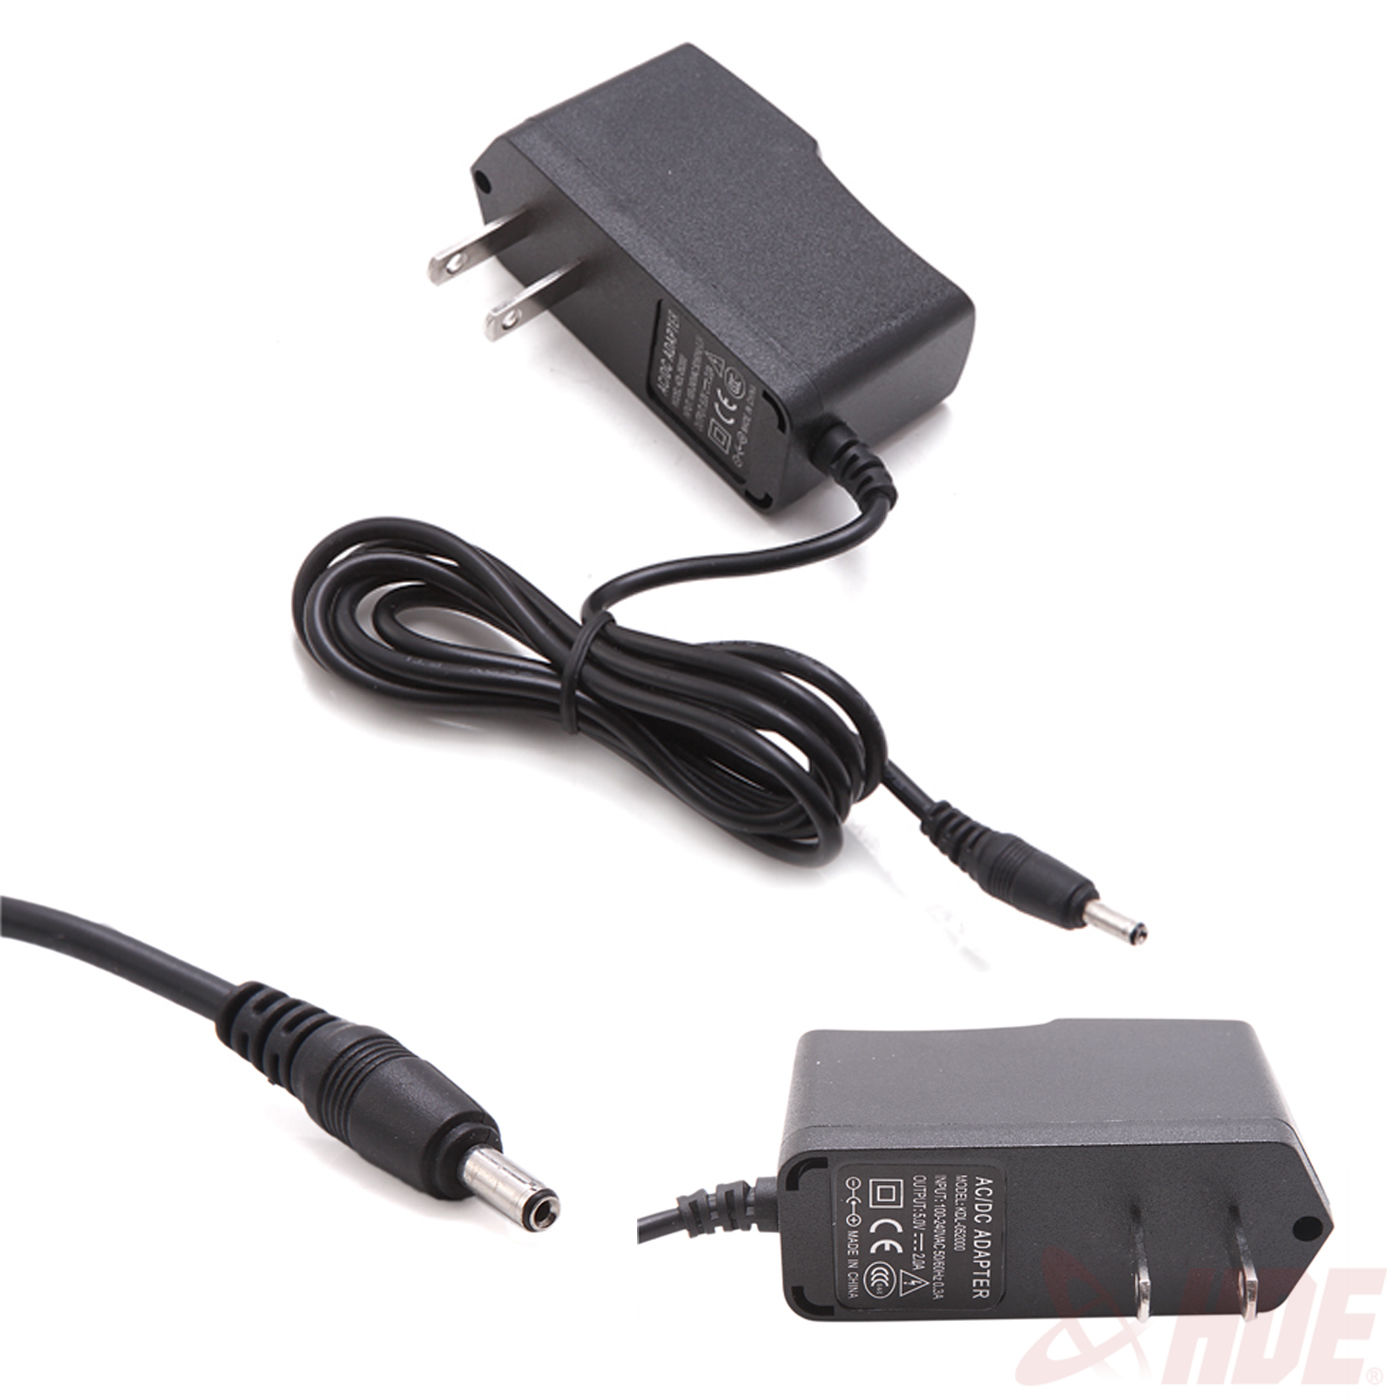 5V 2A AC/DC 3.5mm US Plug Power Supply Adapter Converter Tablet Charger PC Black - Click Image to Close